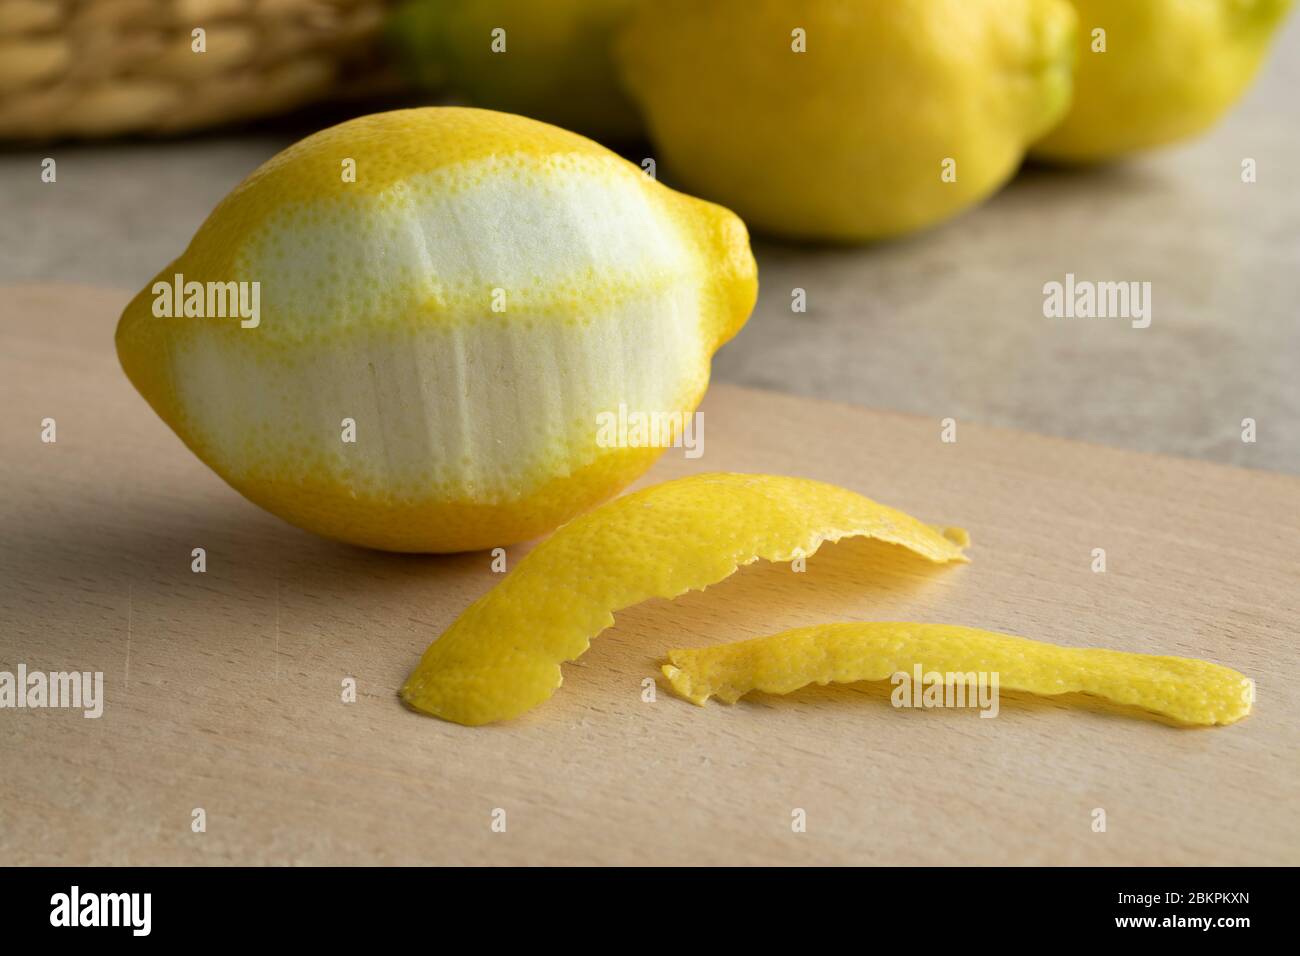 Fresh lemon and thin peel in front close up Stock Photo